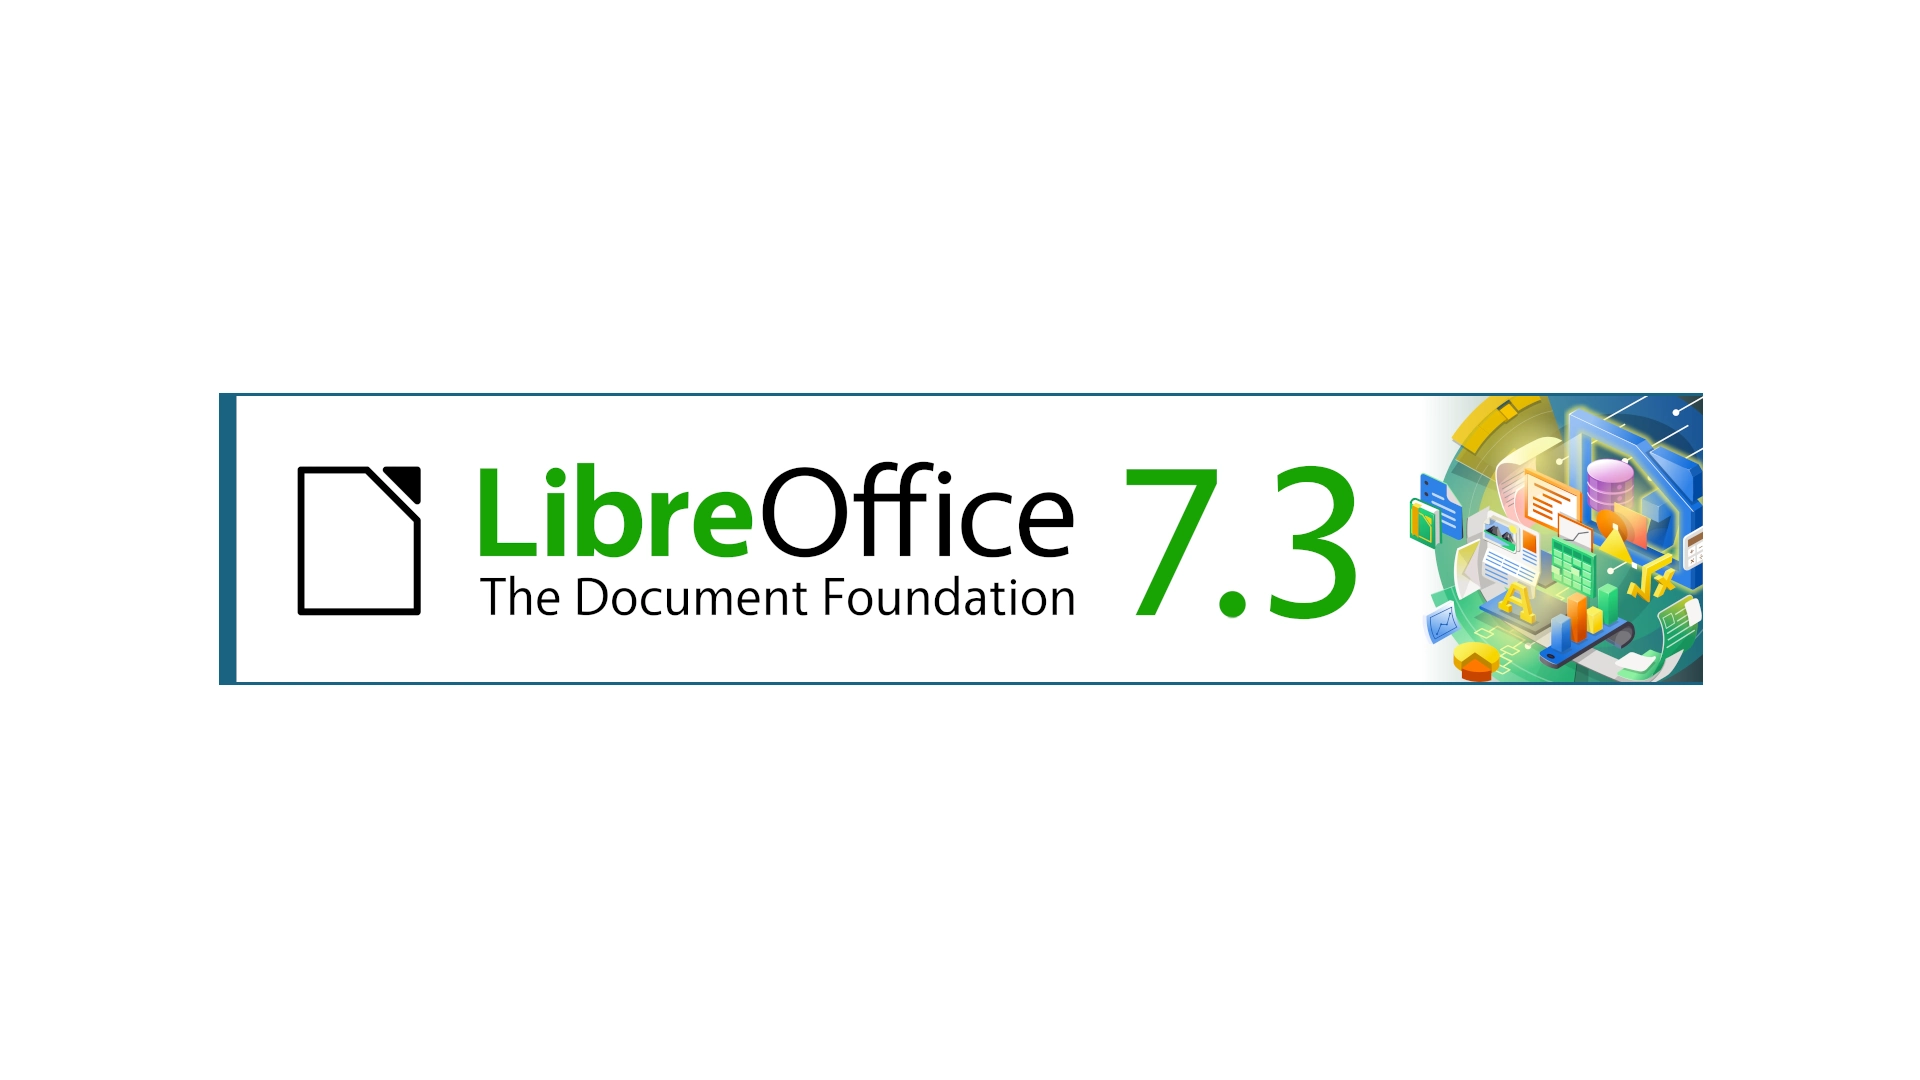 LibreOffice 7.3 Gets Last Maintenance Update, Users Urged to Upgrade to LibreOffice 7.4